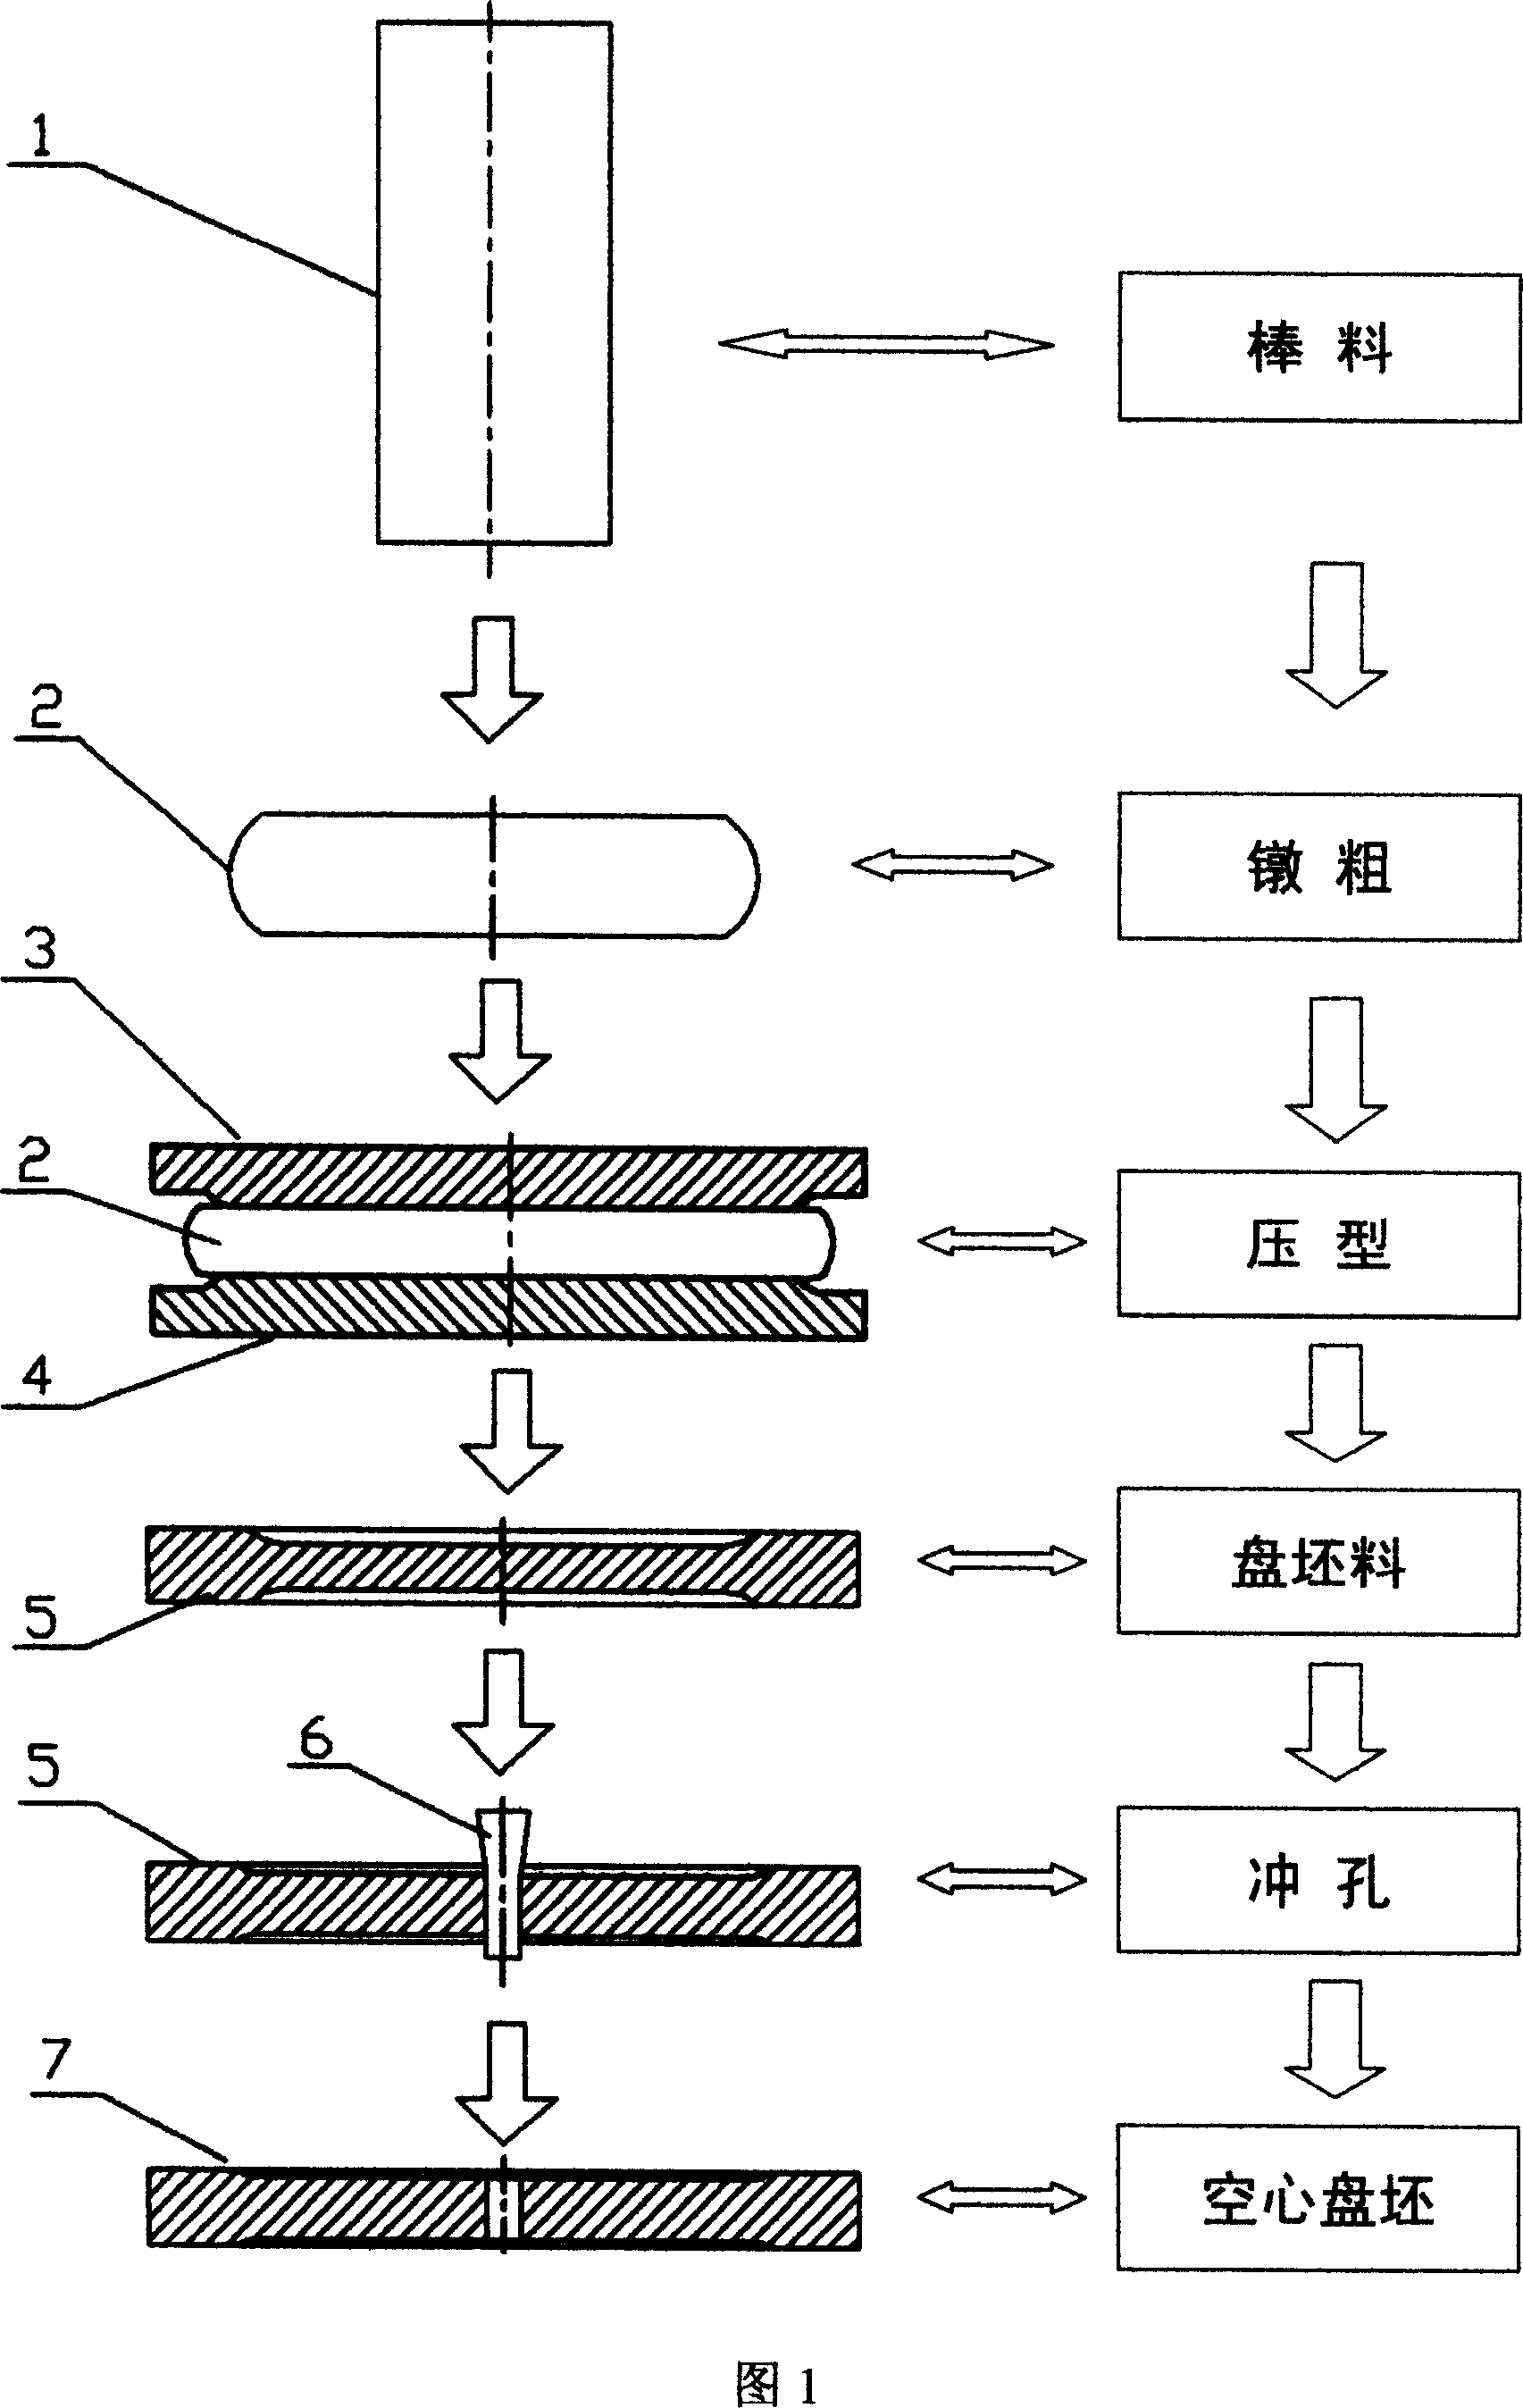 Rolling forming process for large hollow disc forging